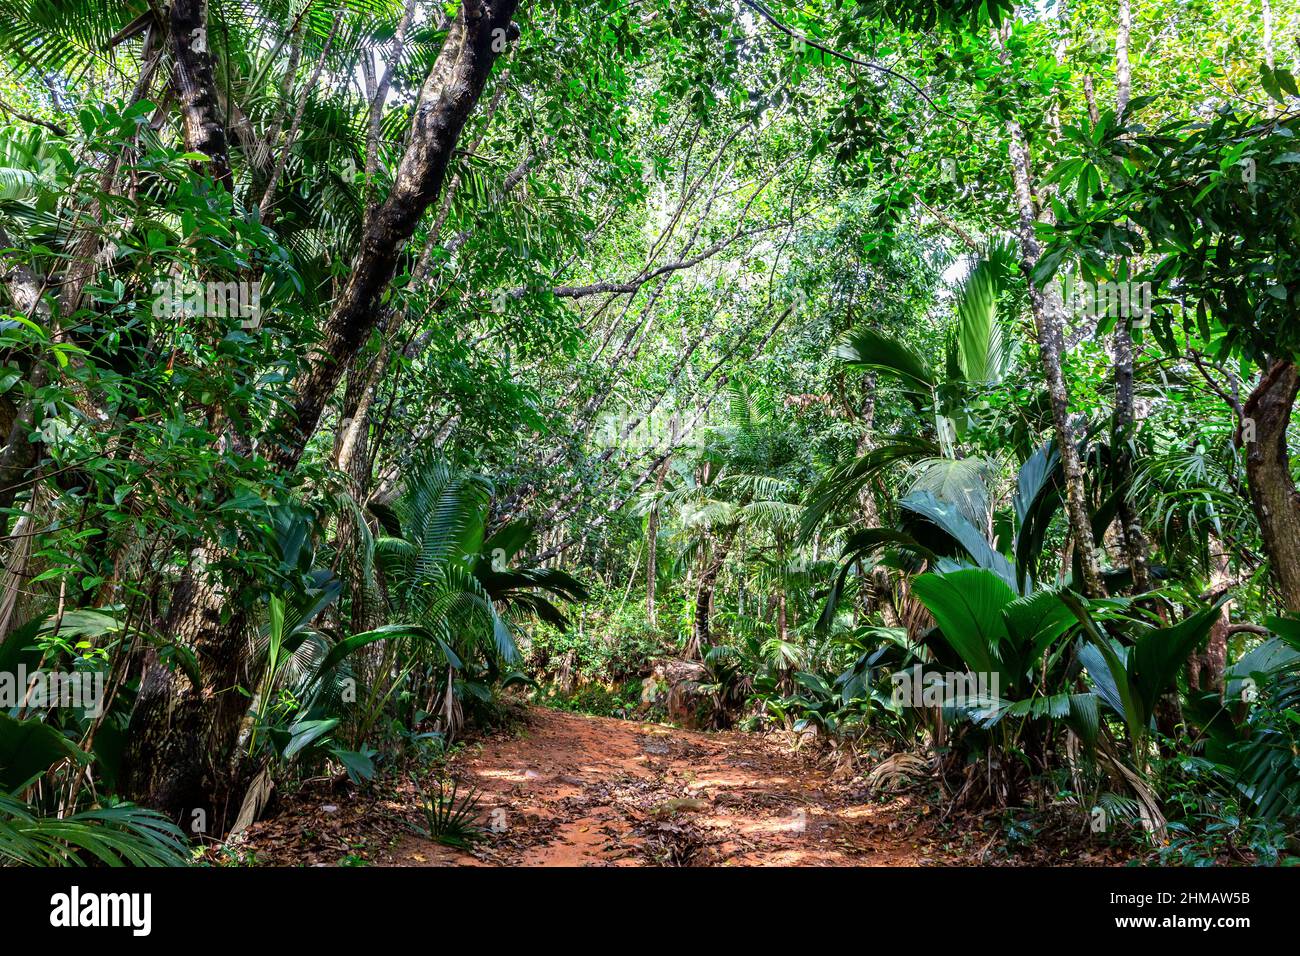 Lush tropical vegetation in dark rainforest with endemic palm trees at Glacis Noire nature trail leading to the highest peak of Praslin Island. Stock Photo